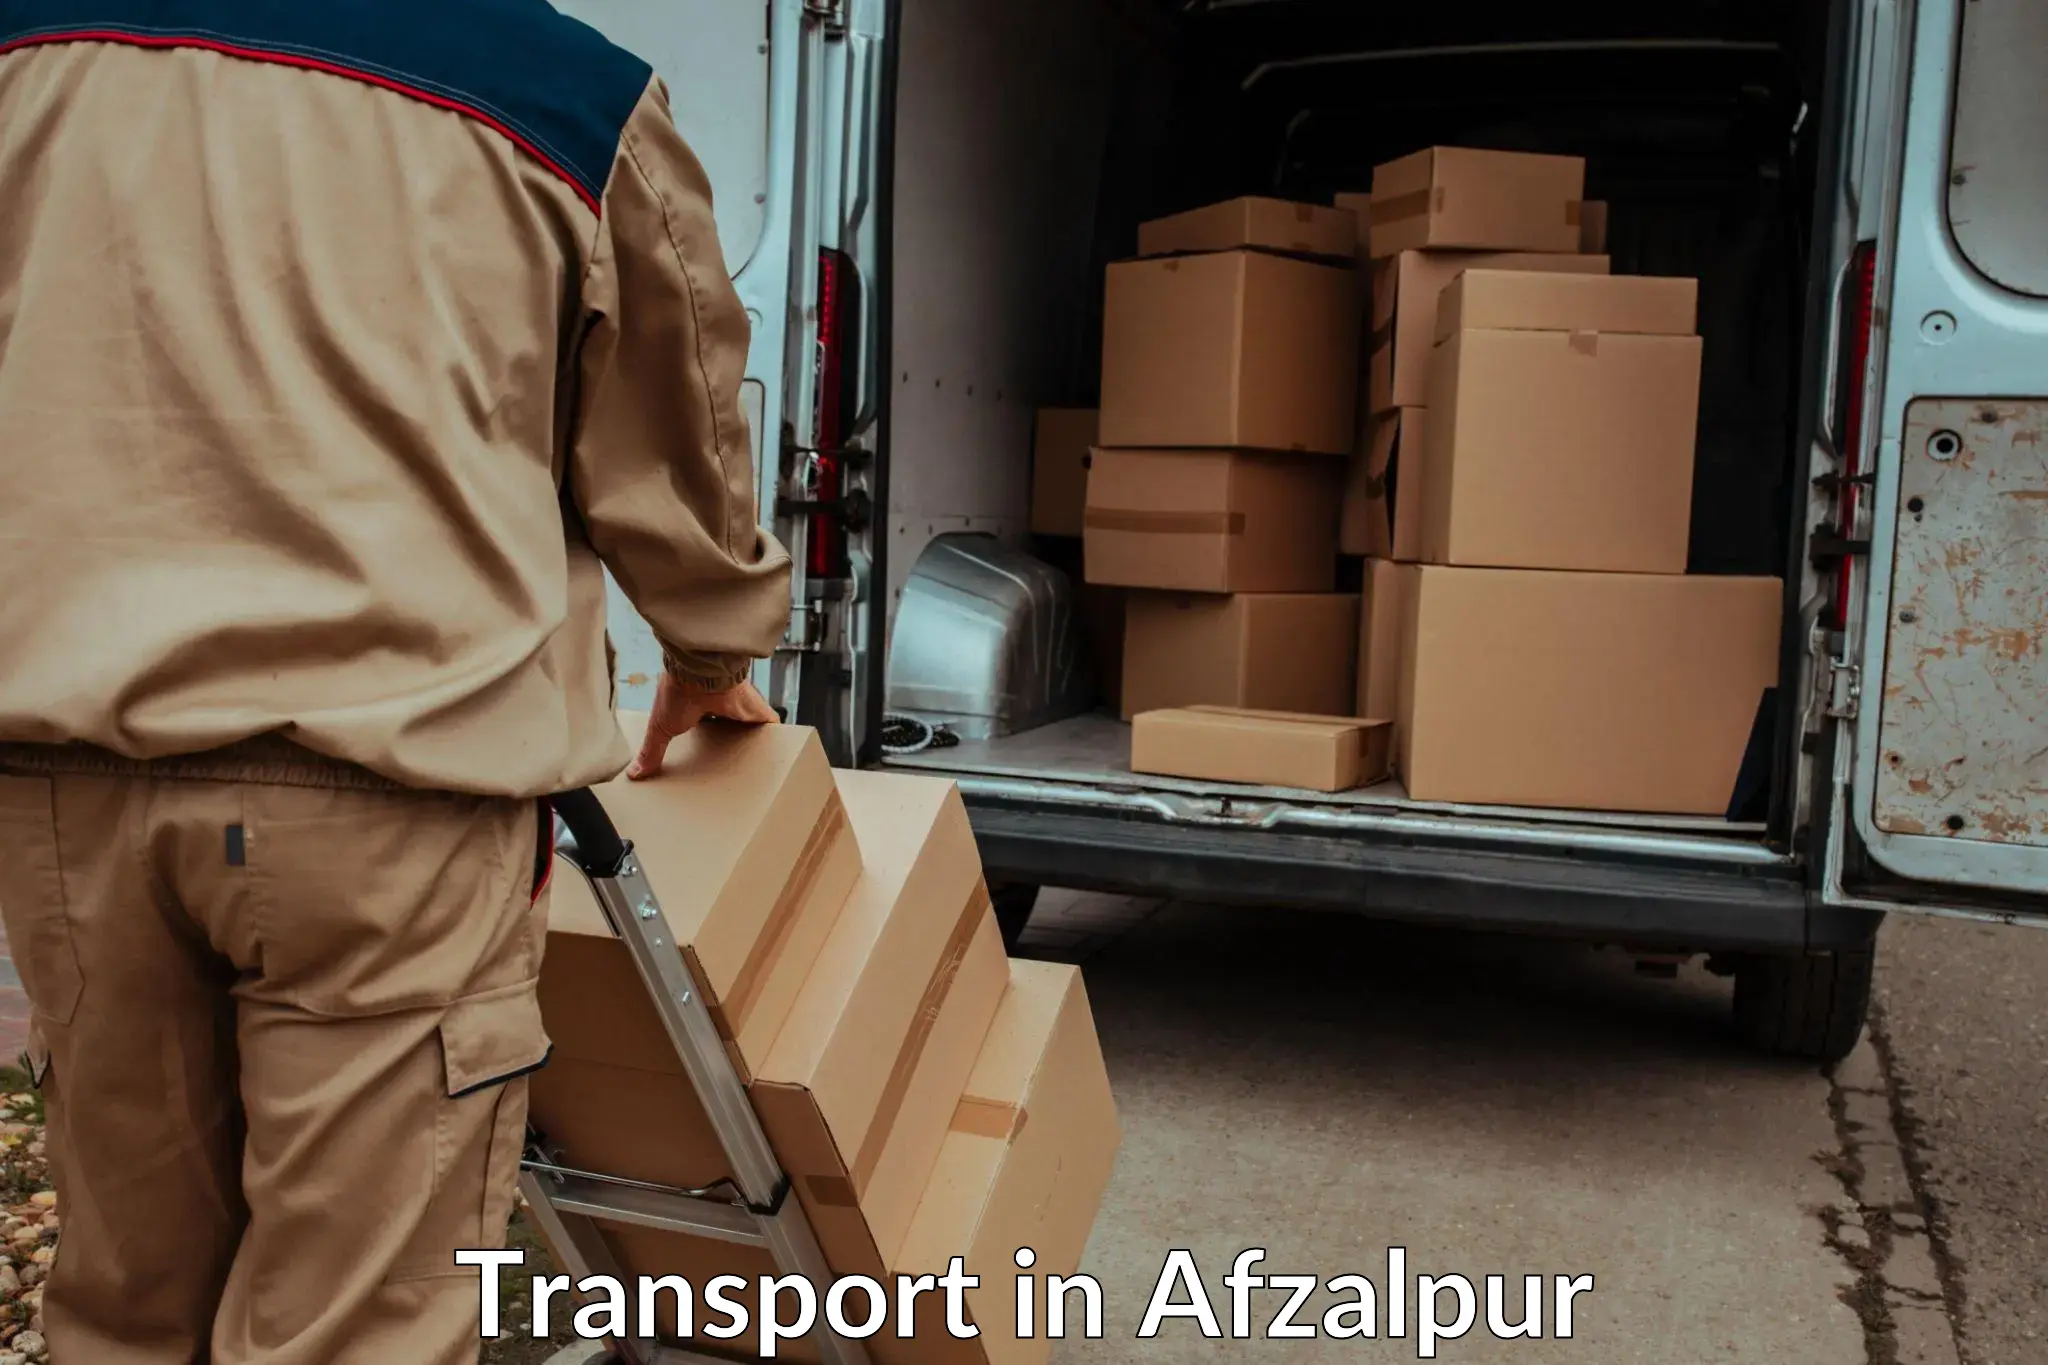 Container transport service in Afzalpur